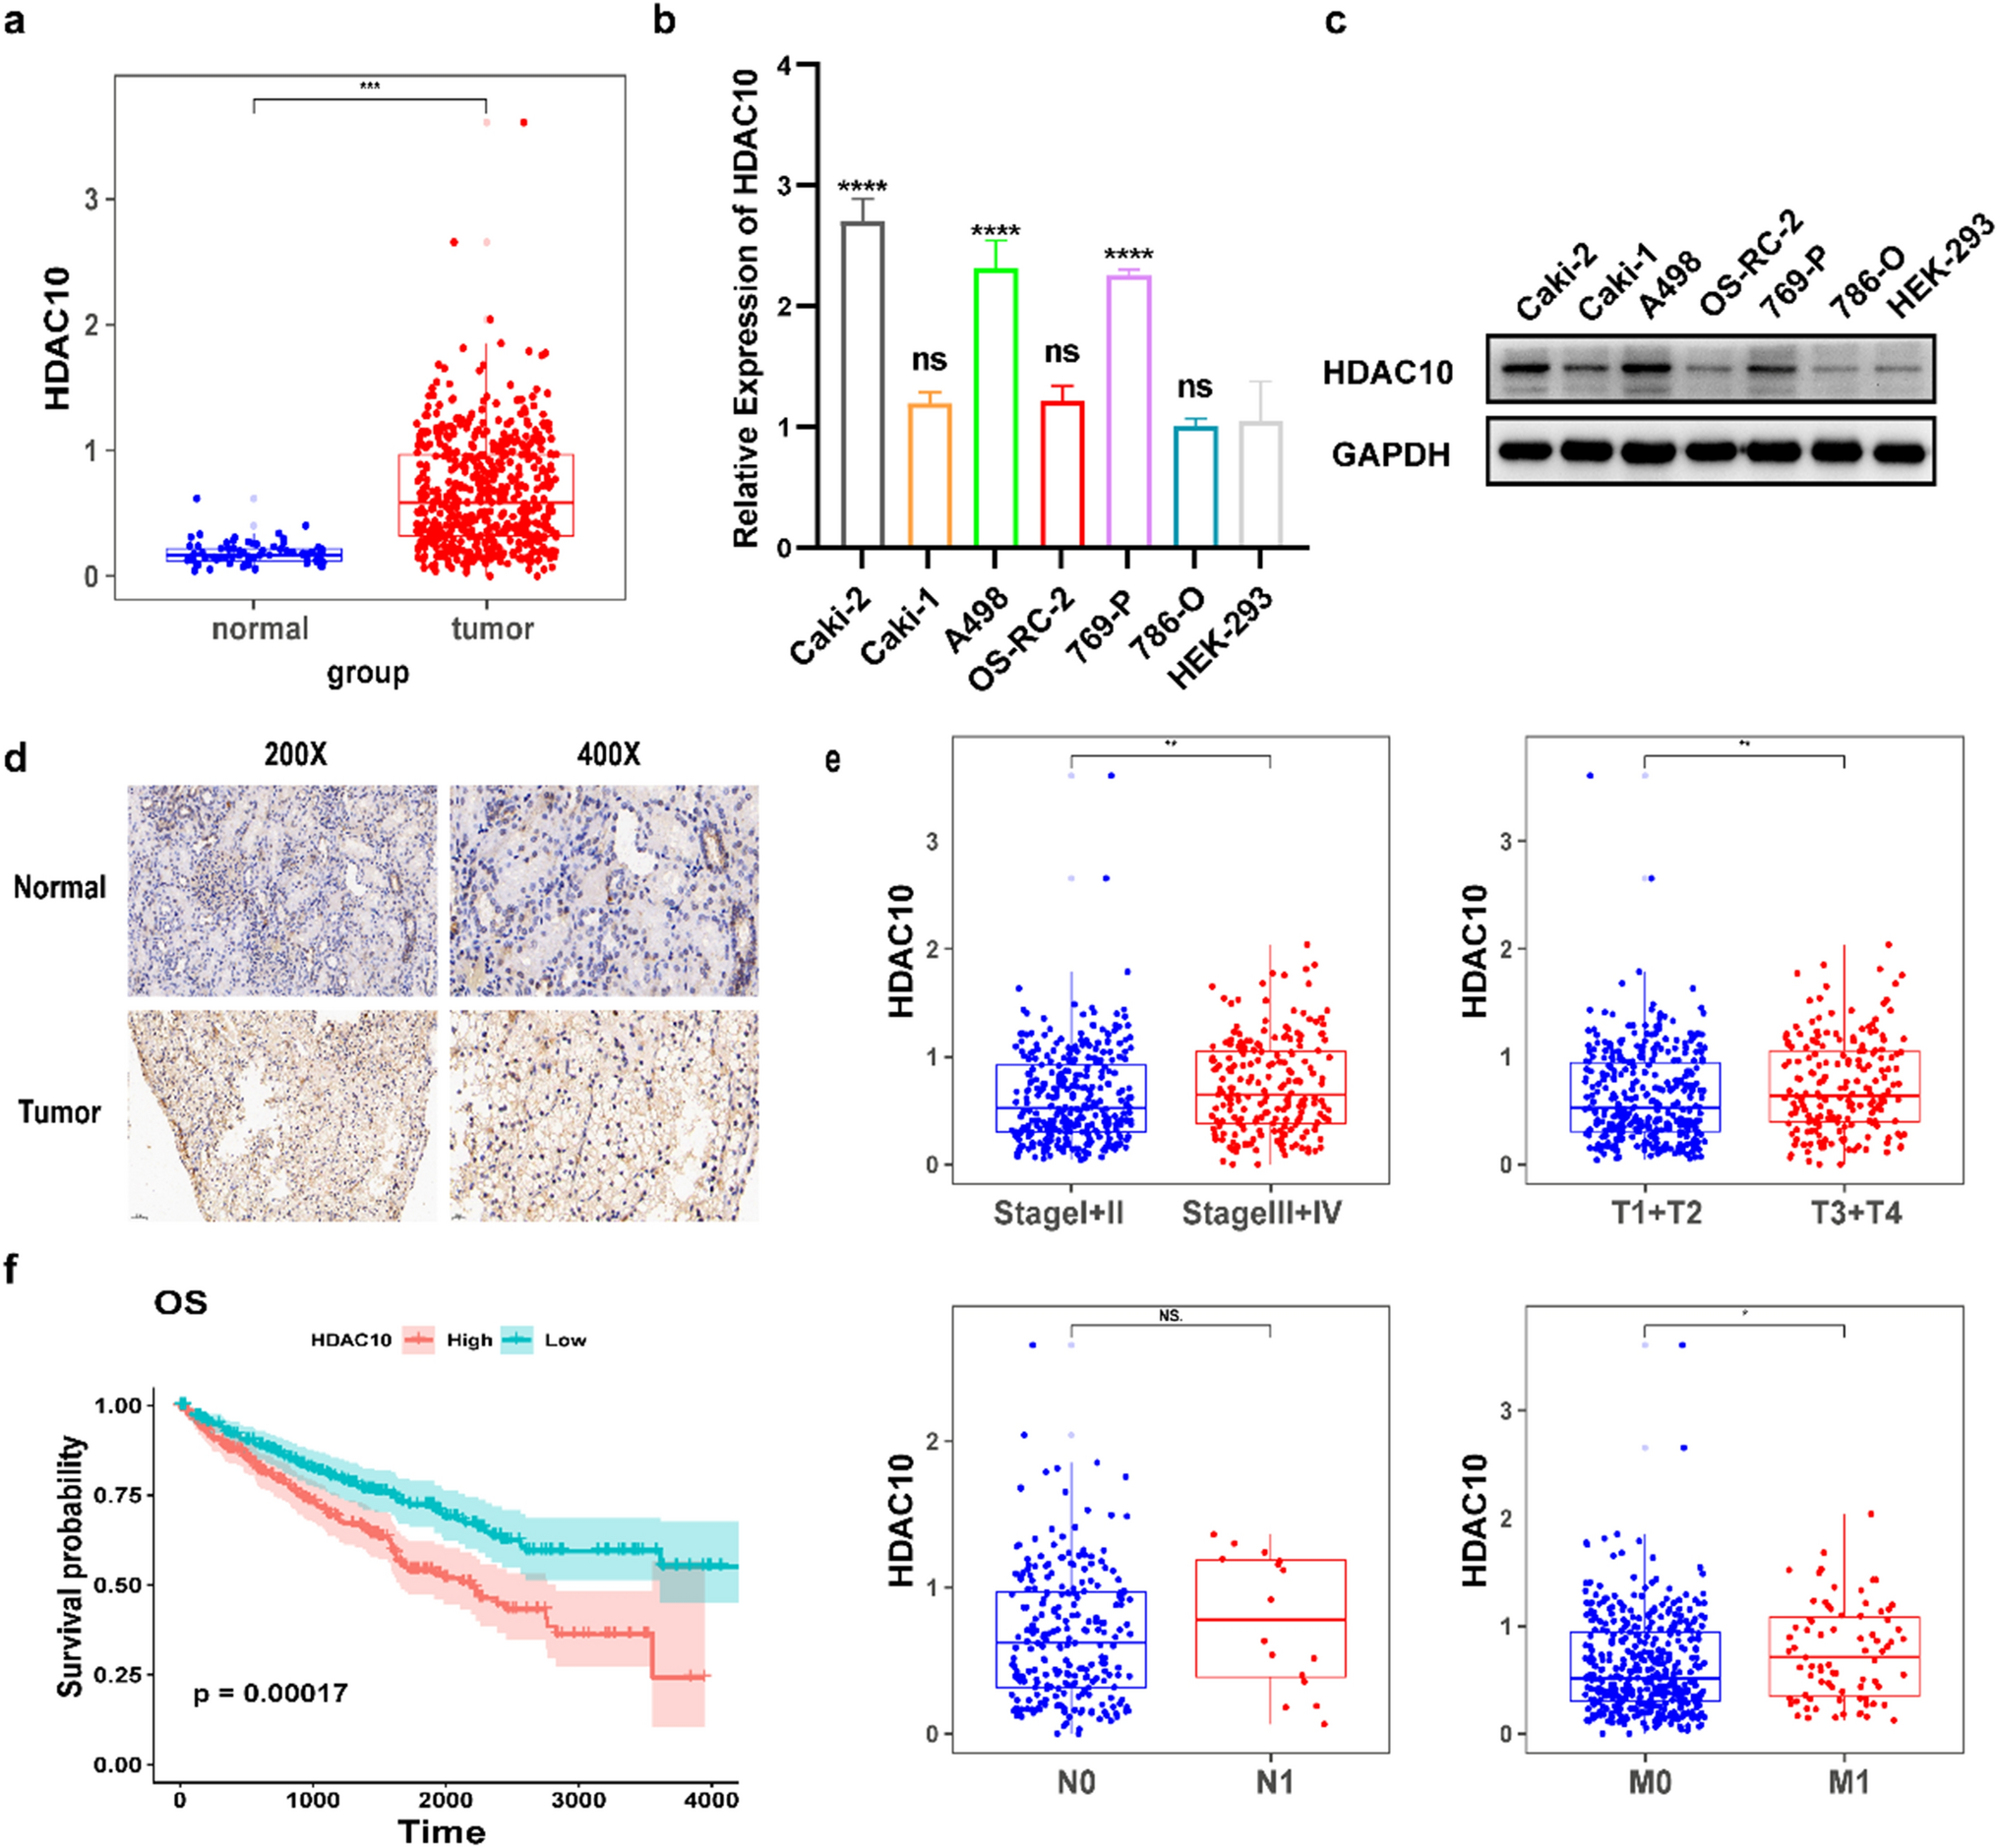 Elevated histone deacetylase 10 expression promotes the progression of clear cell renal cell carcinoma by Notch-1-PTEN signaling axis